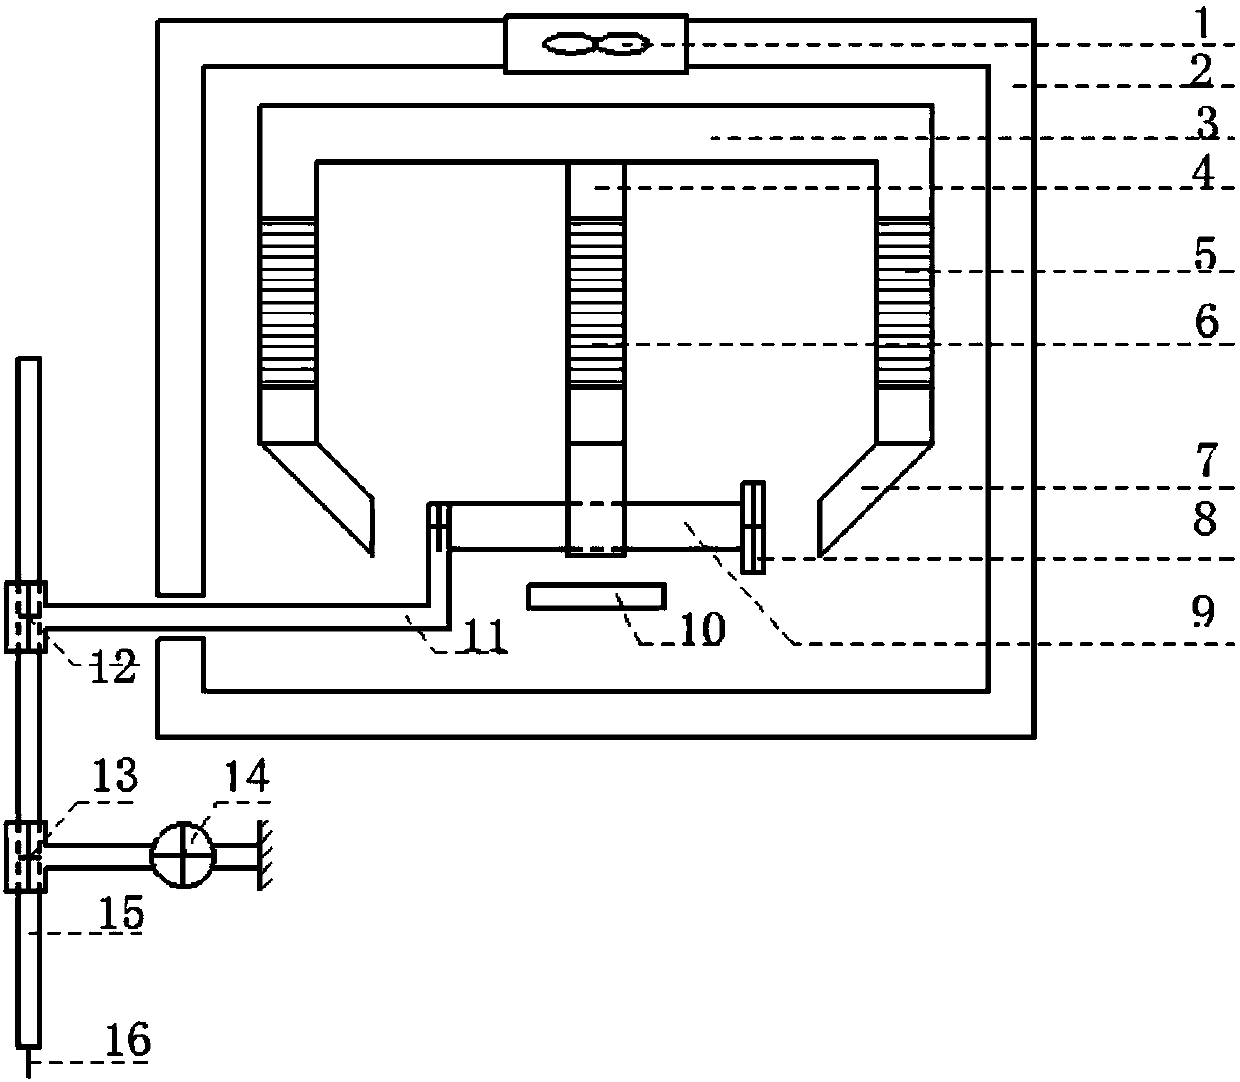 A Magnetic Strain Welding Oscillator with Seam Tracking Function